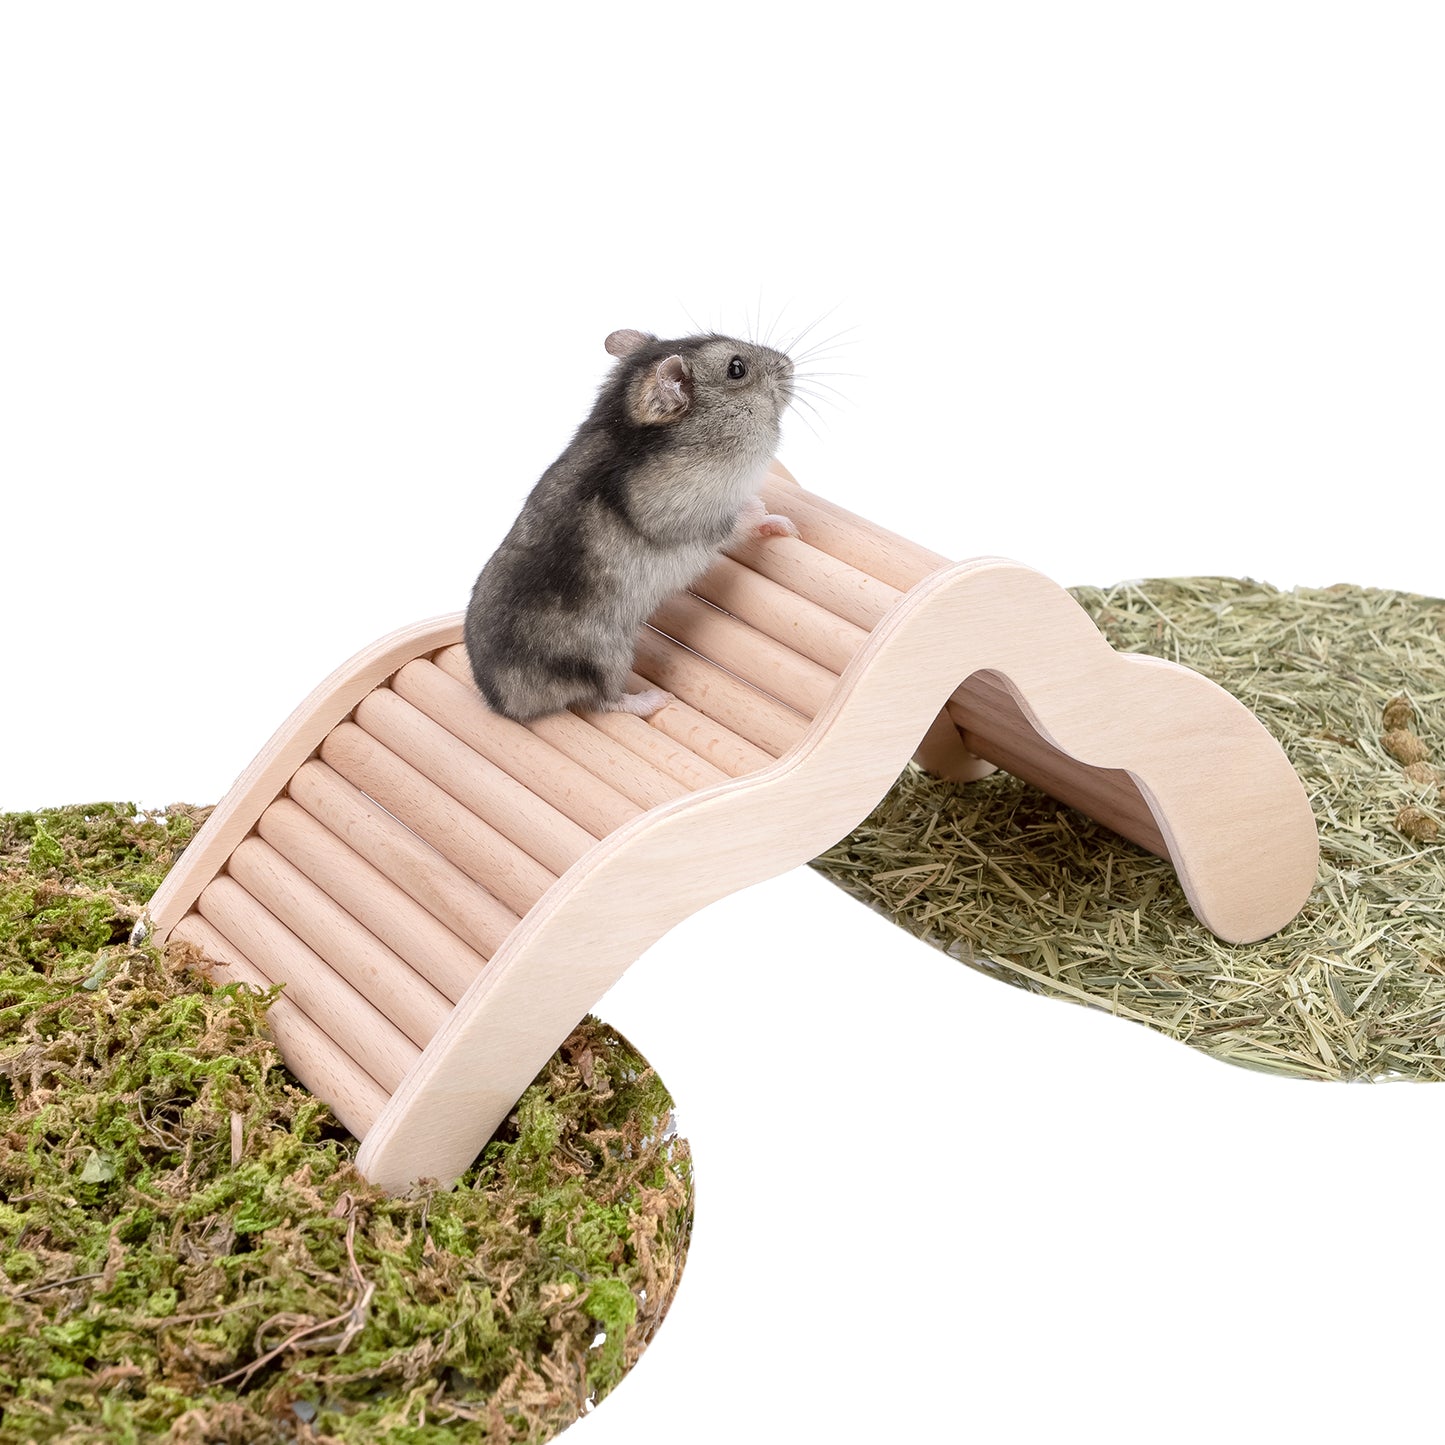 Niteangel Hamster Climbing Toy Wooden Ladder Bridge for Hamsters Gerbils Mice and Small Animals